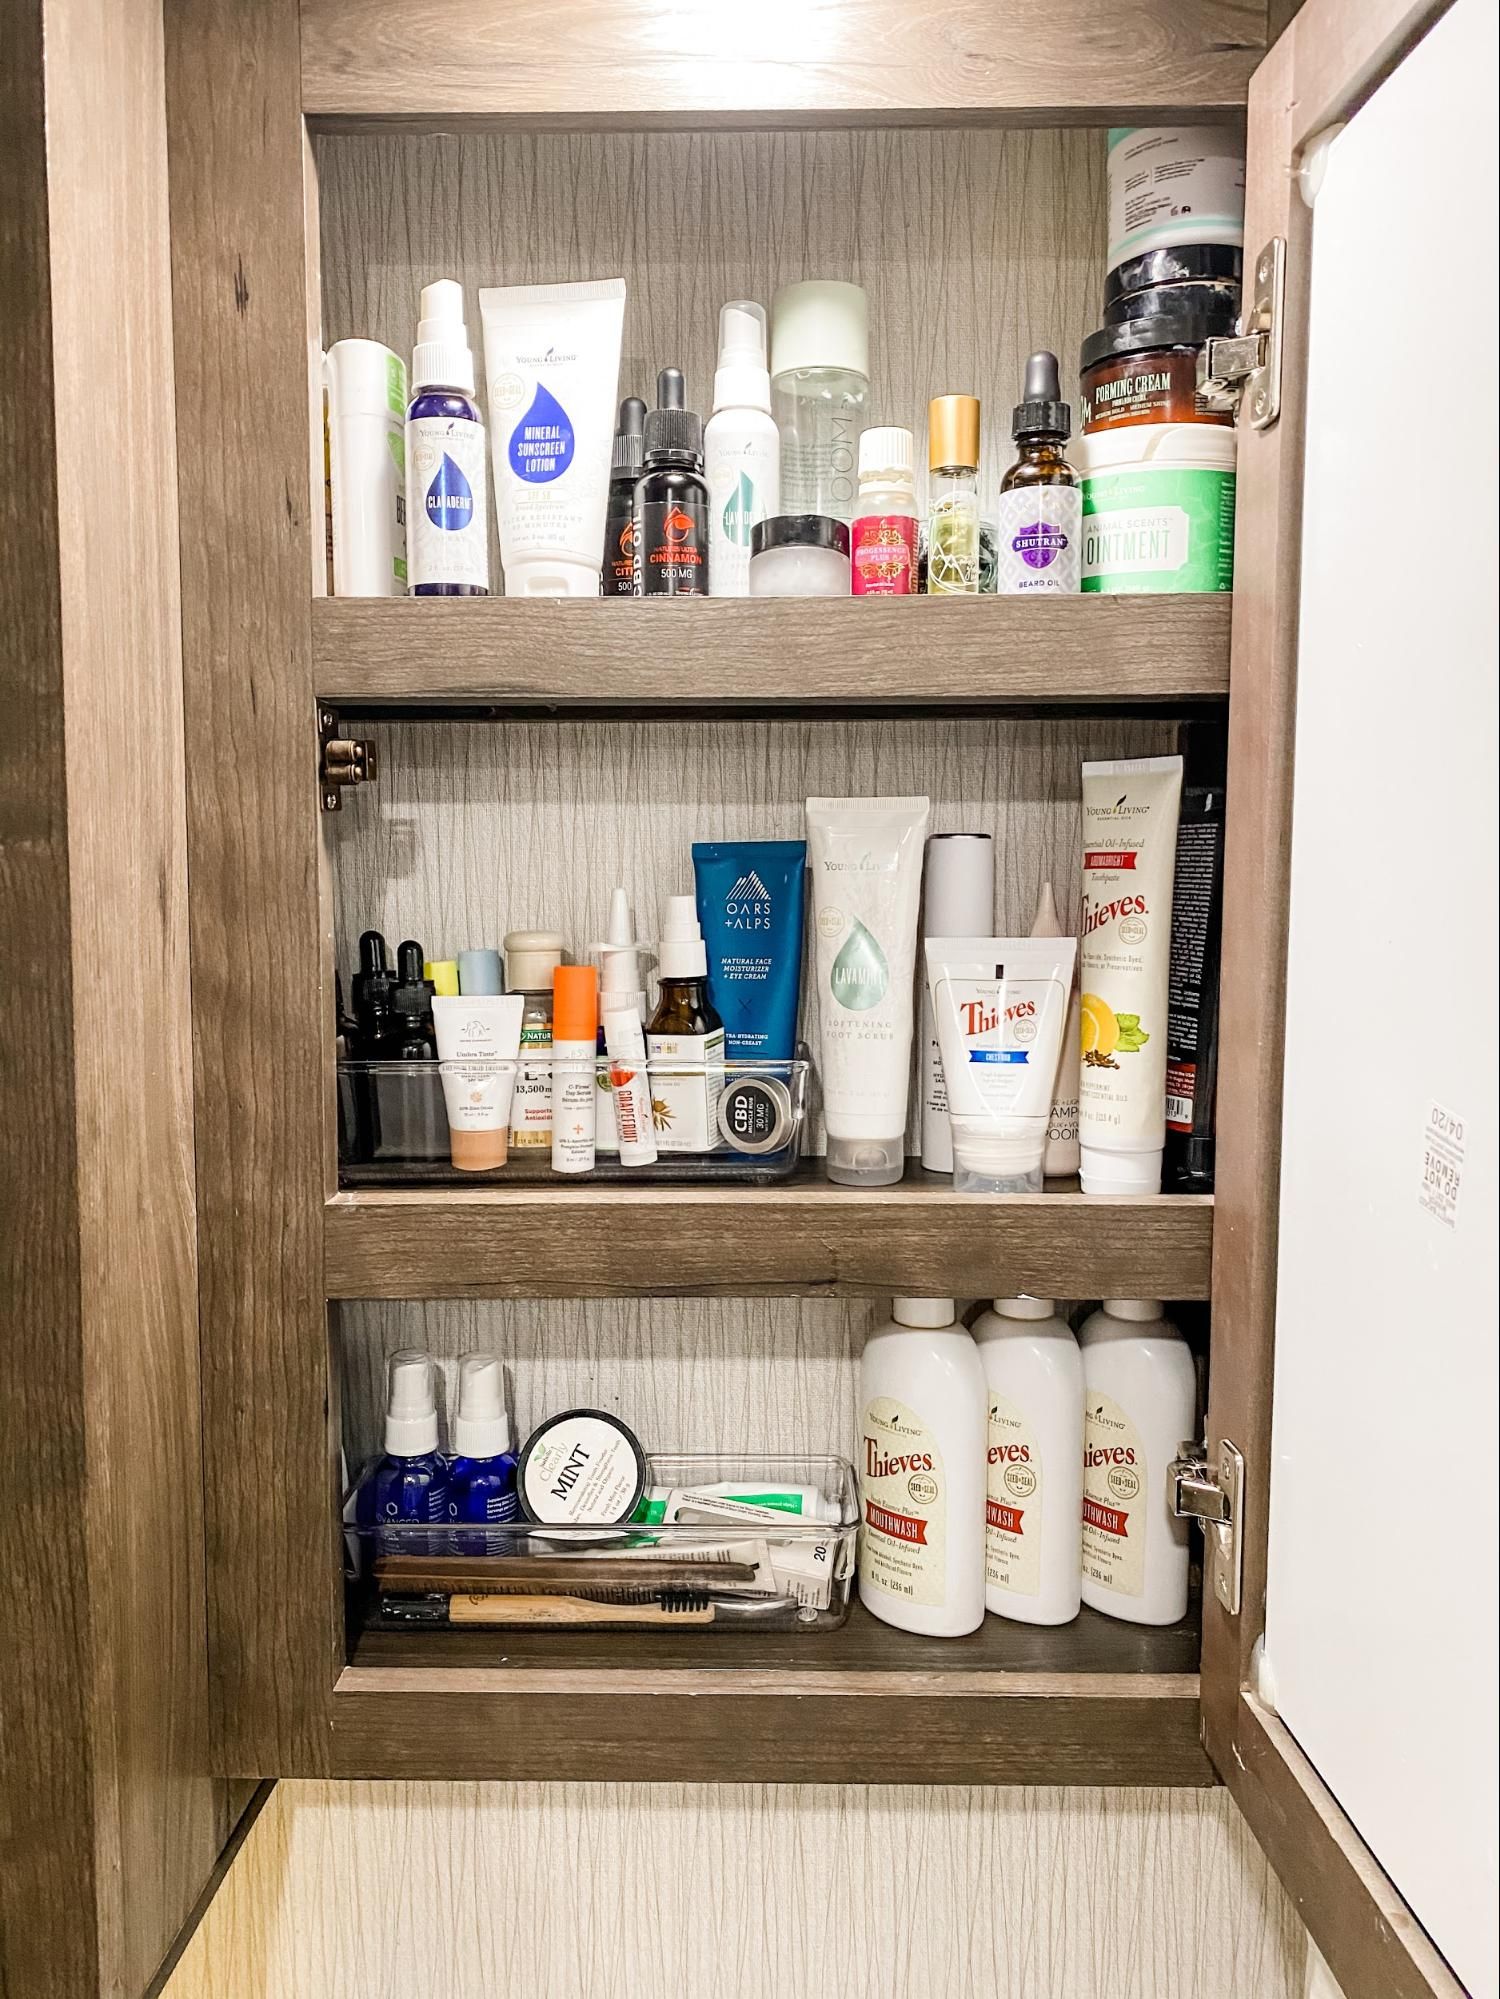 A bathroom medicine cabinet with storage containers grouping small items.